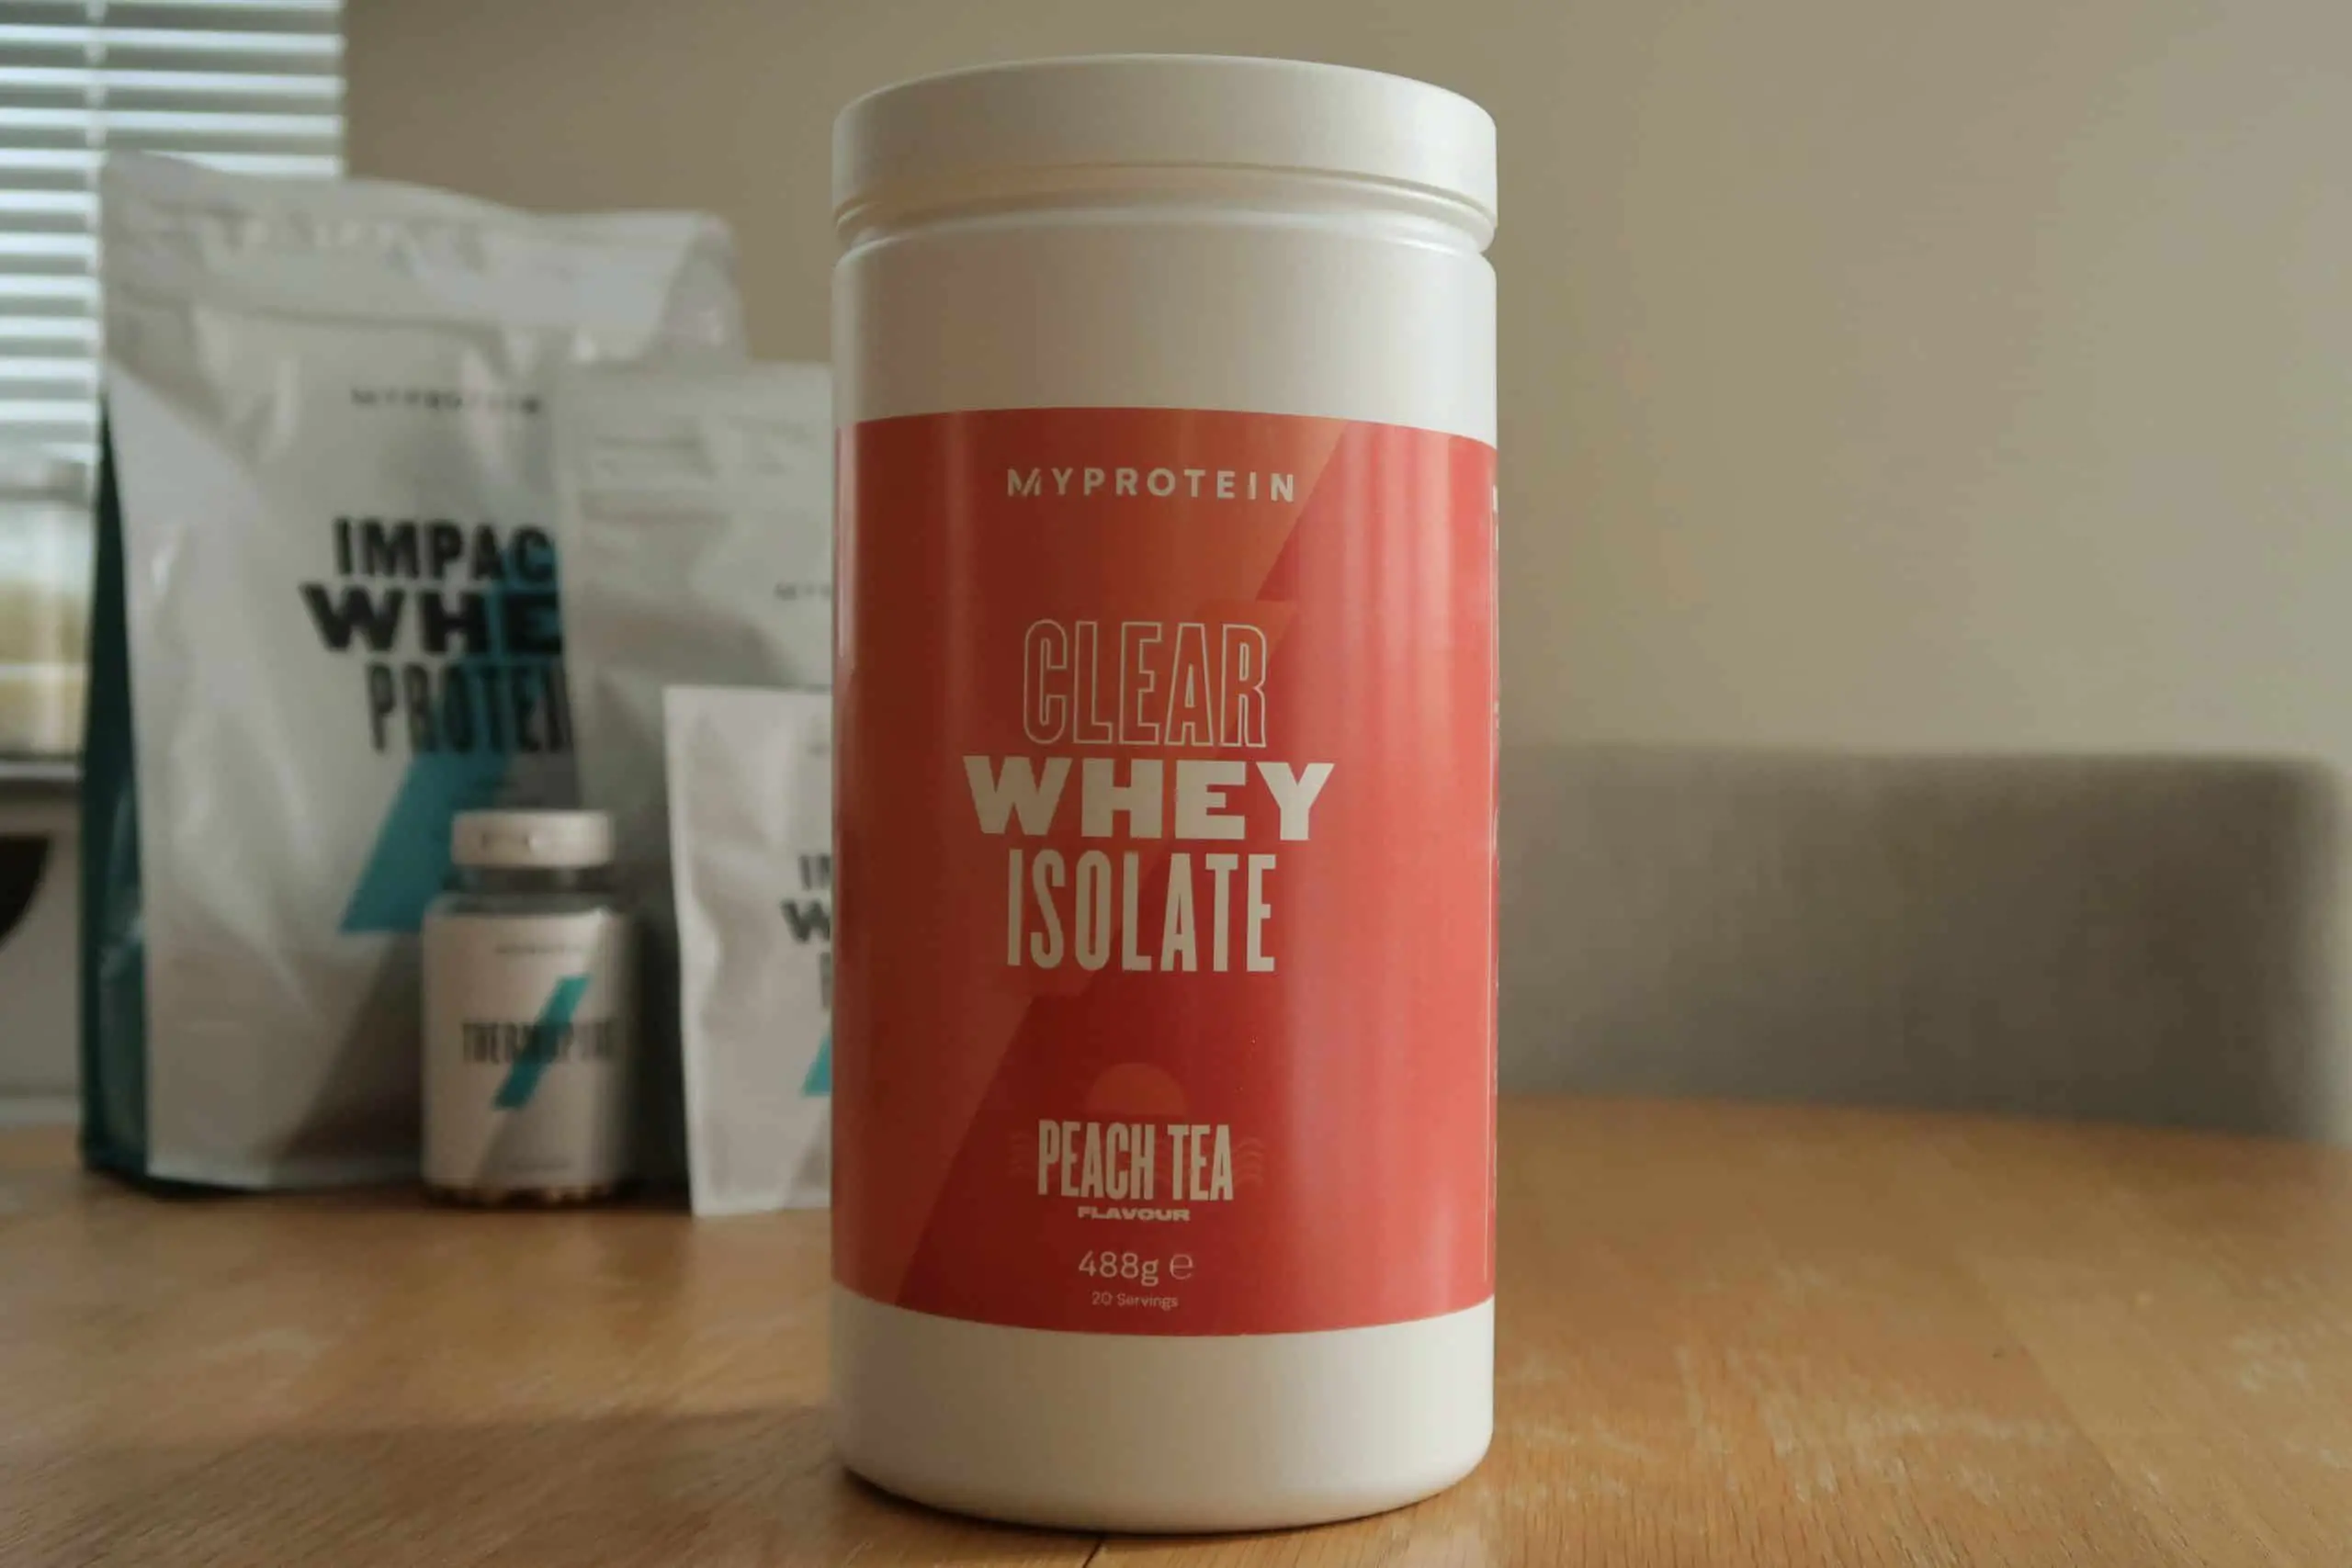 Myprotein New Clear Whey Protein Isolate Review Fitness To Diet,Boneless Pork Loin Recipes